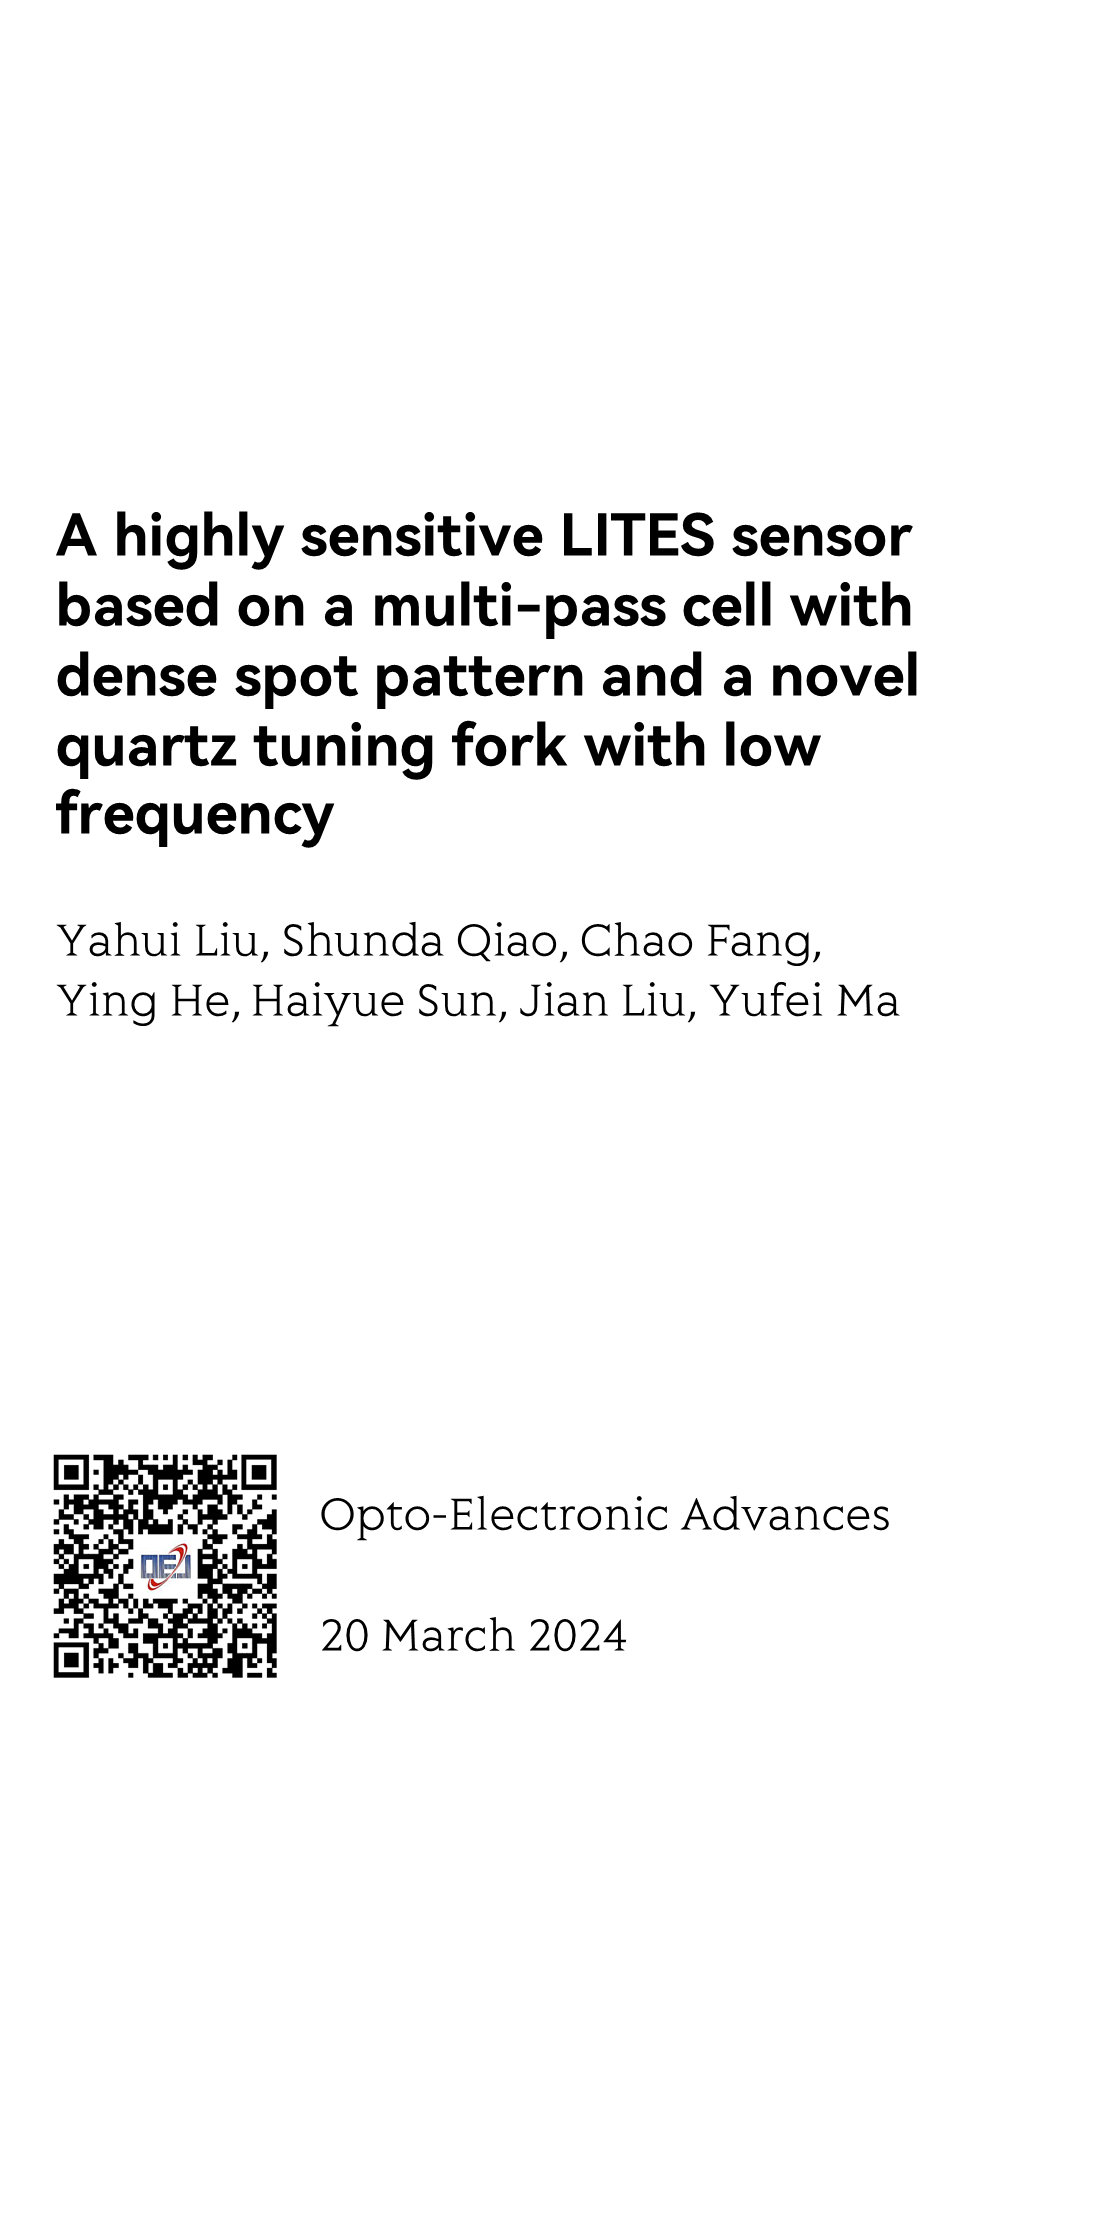 A highly sensitive LITES sensor based on a multi-pass cell with dense spot pattern and a novel quartz tuning fork with low frequency_1